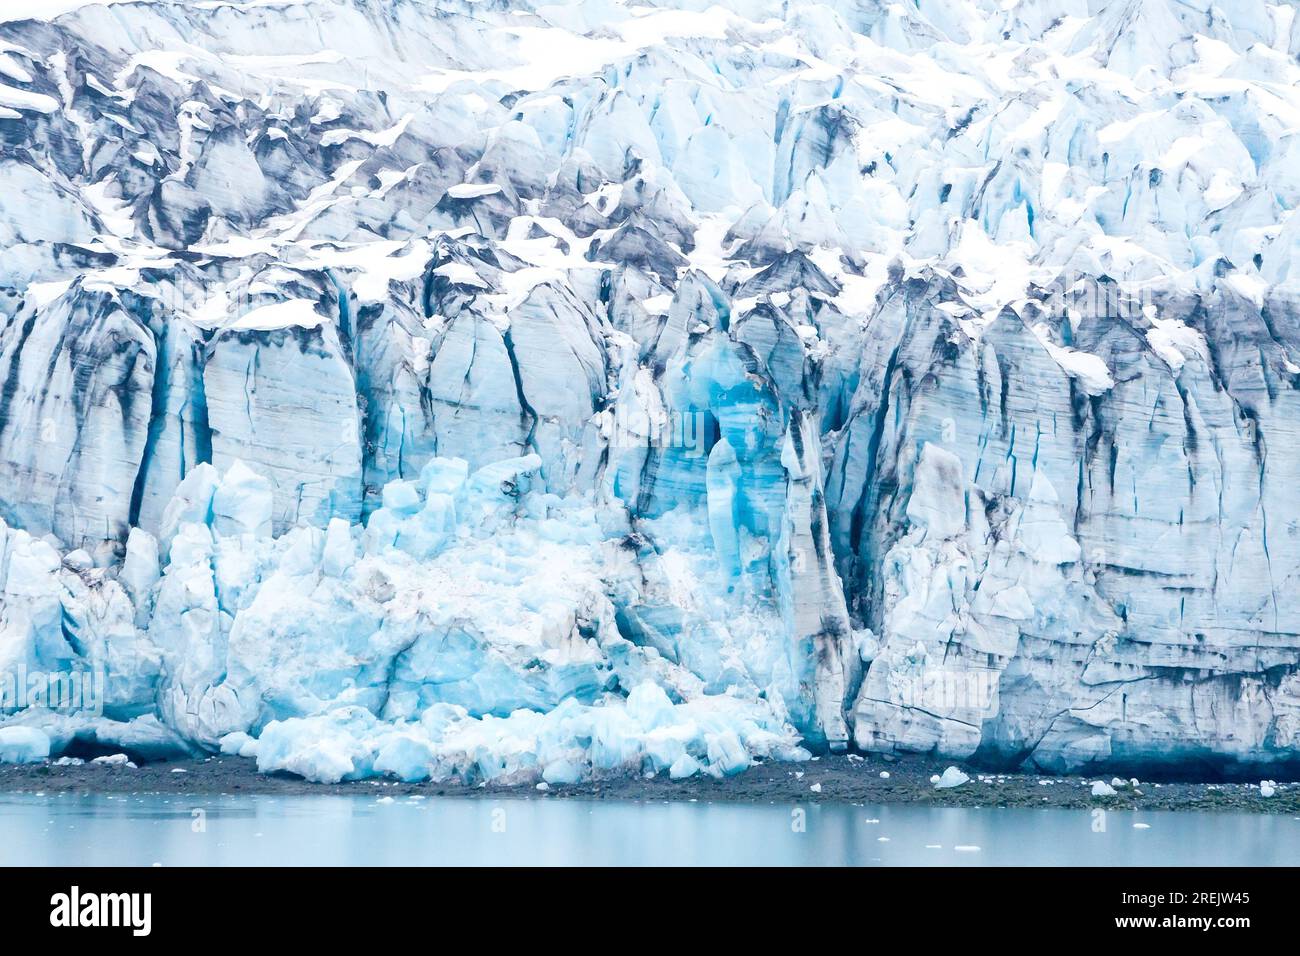 Close up of the blue ice of the Lamplugh Glacier terminus in Glacier Bay National Park, Alaska Stock Photo